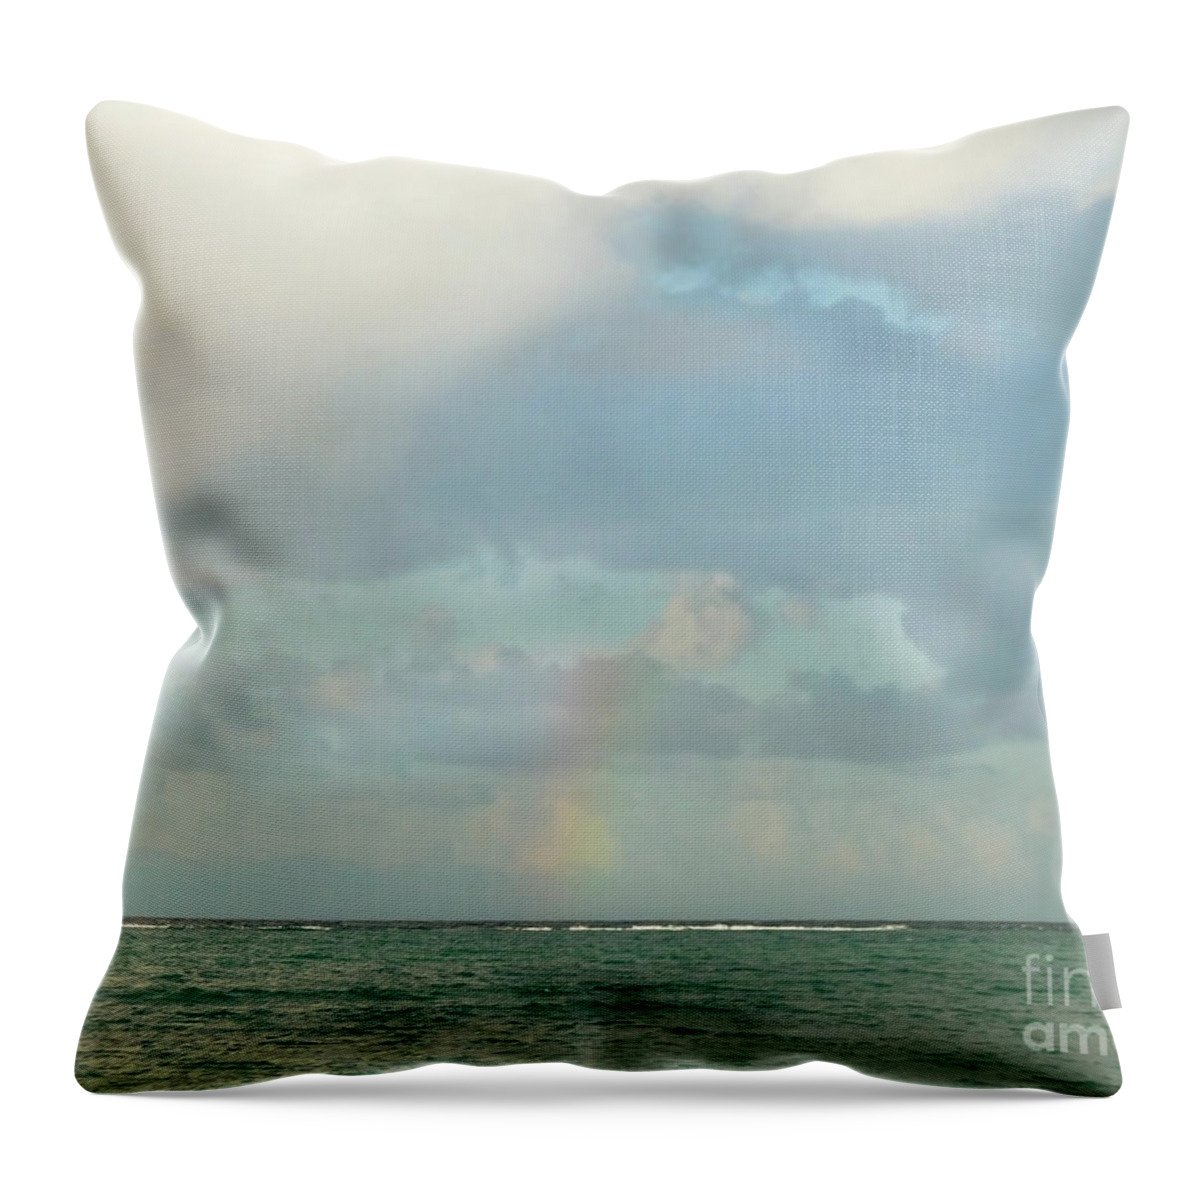 Photography Throw Pillow featuring the photograph Rainbow 1 by Francesca Mackenney